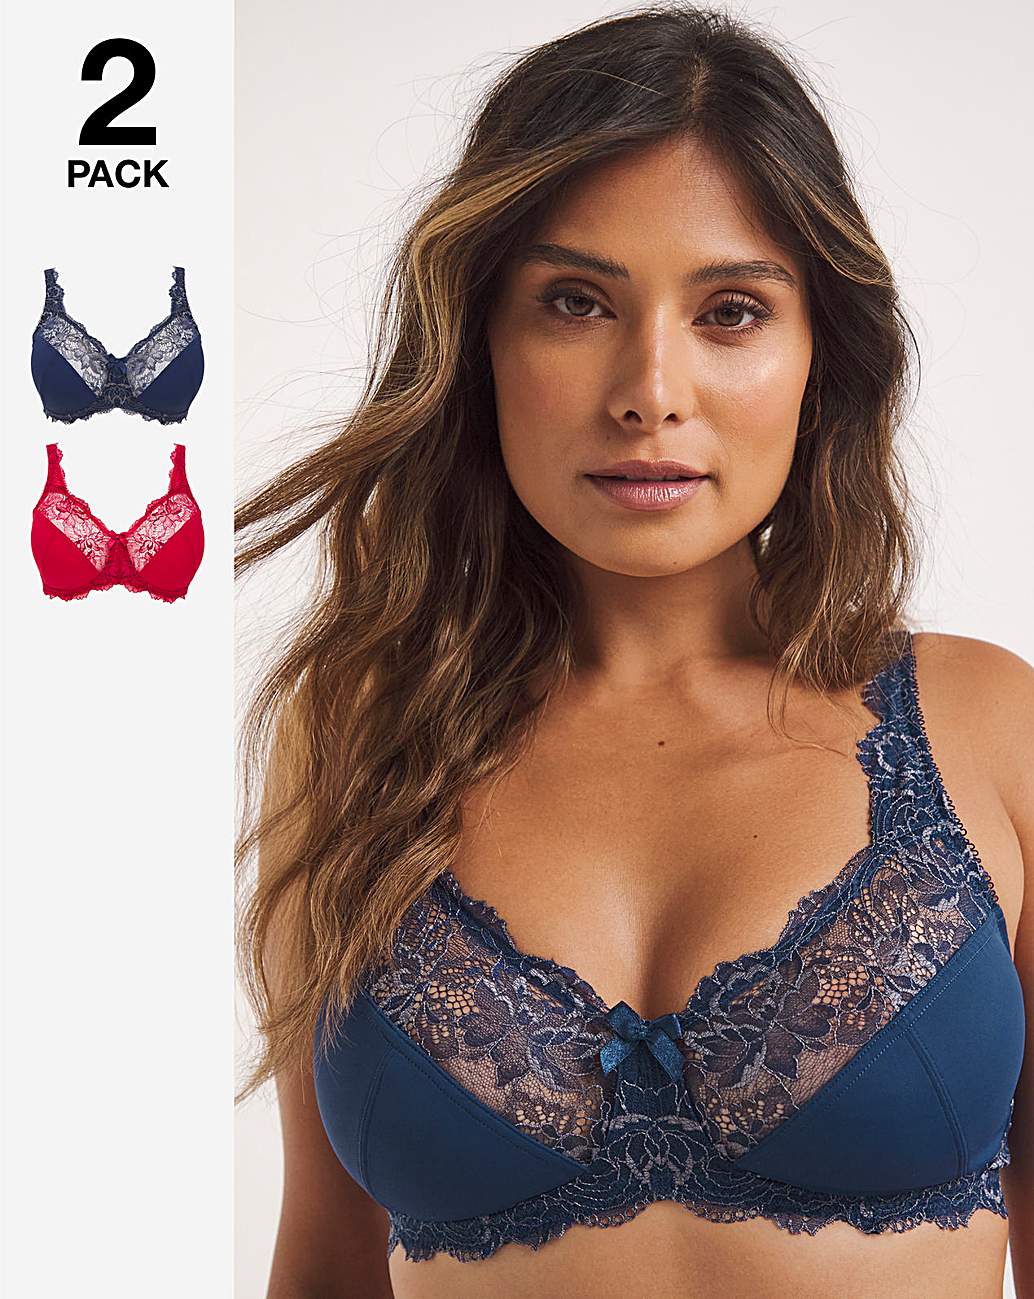 2 Pack Ella Lace Full Cup Non-Wired Bras